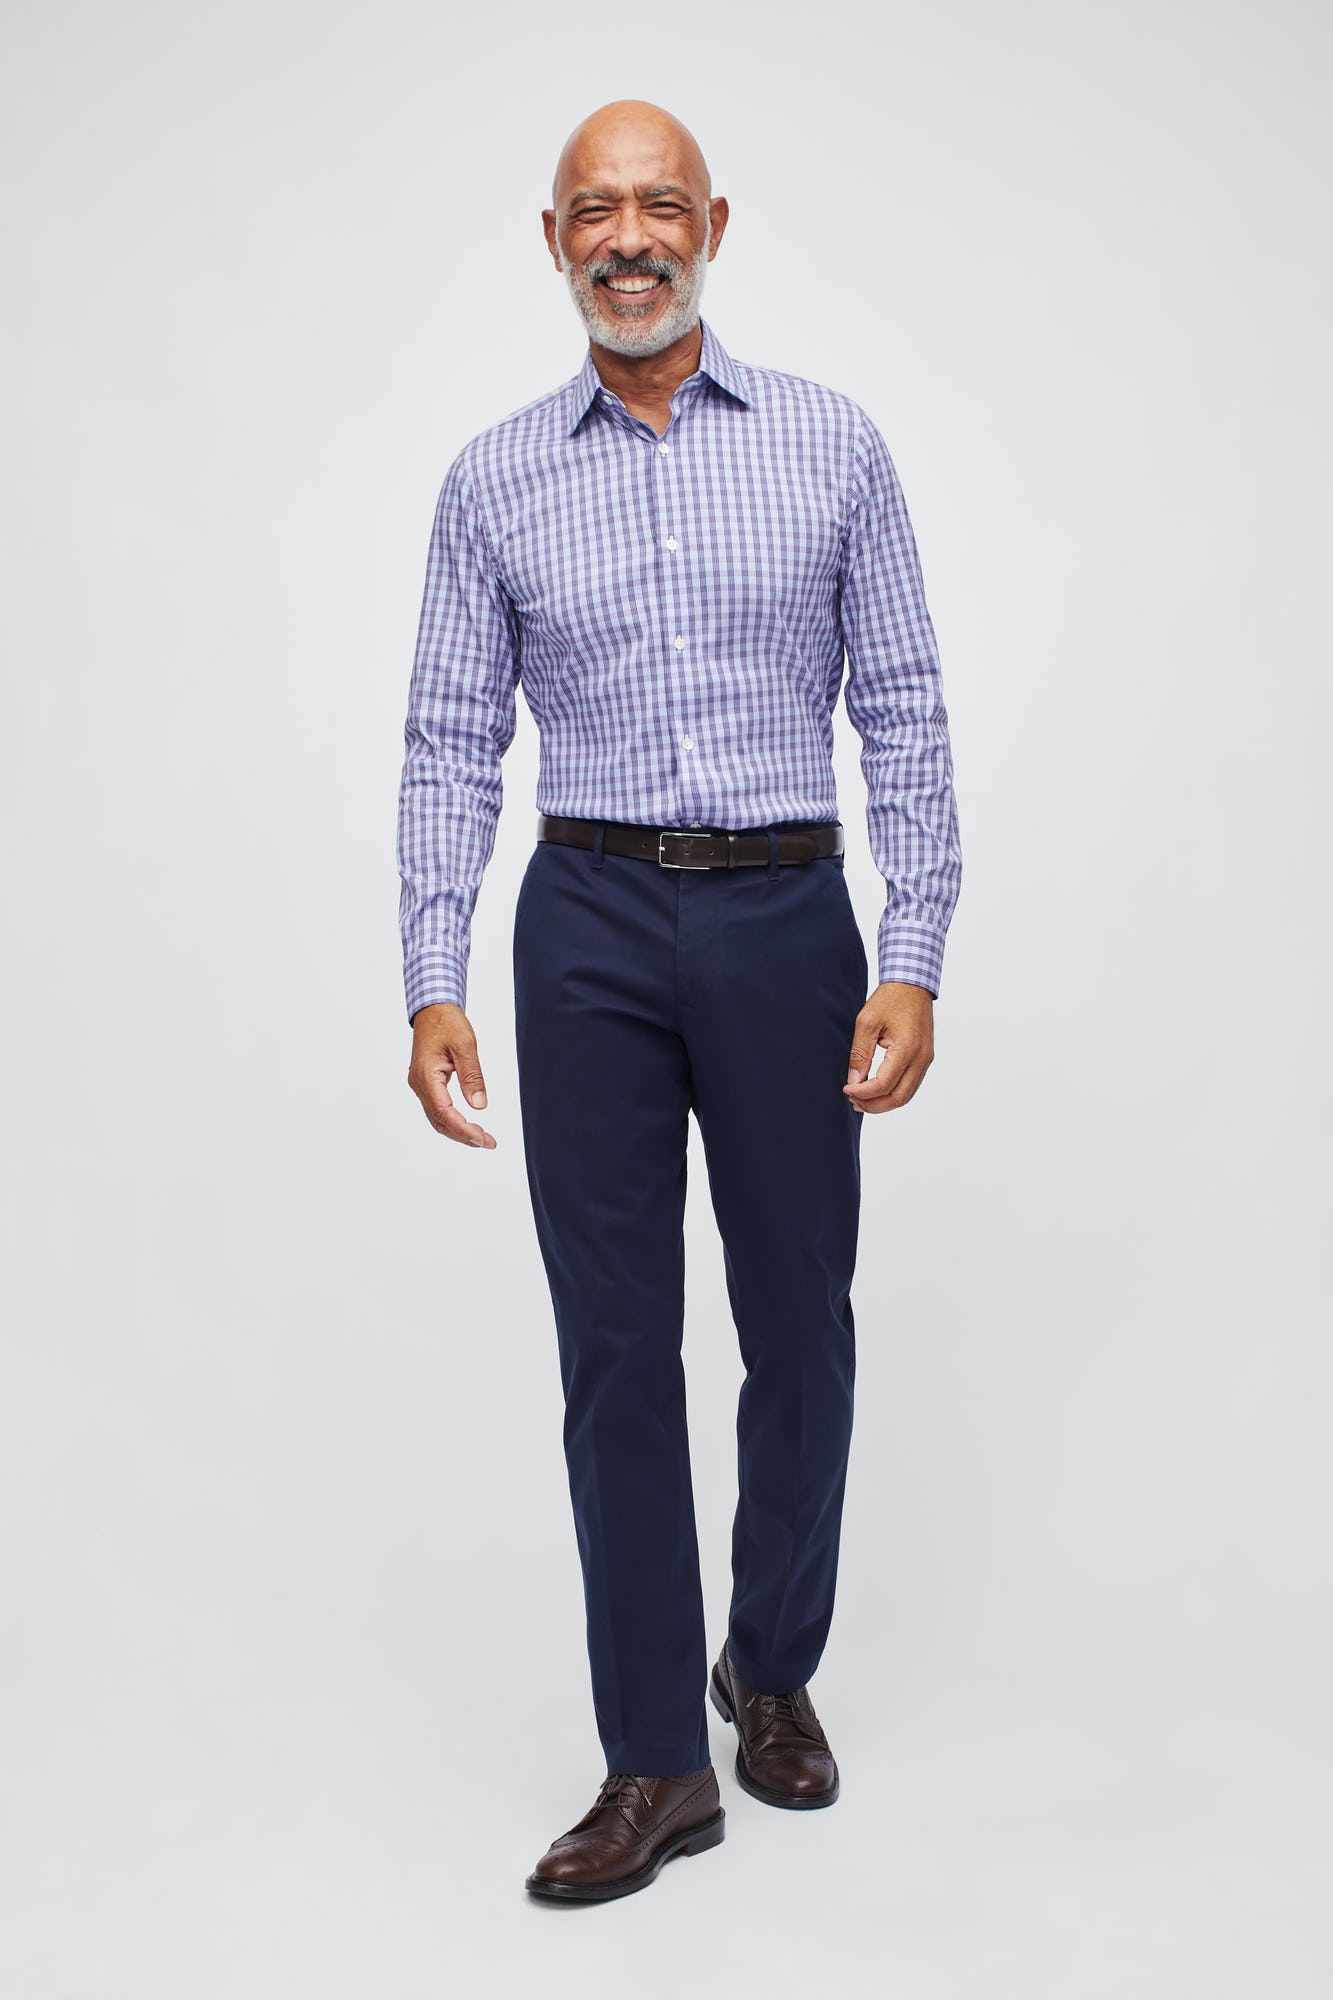 Bonobos Pants Will Make Dad Look Great on Father's Day and Every Day